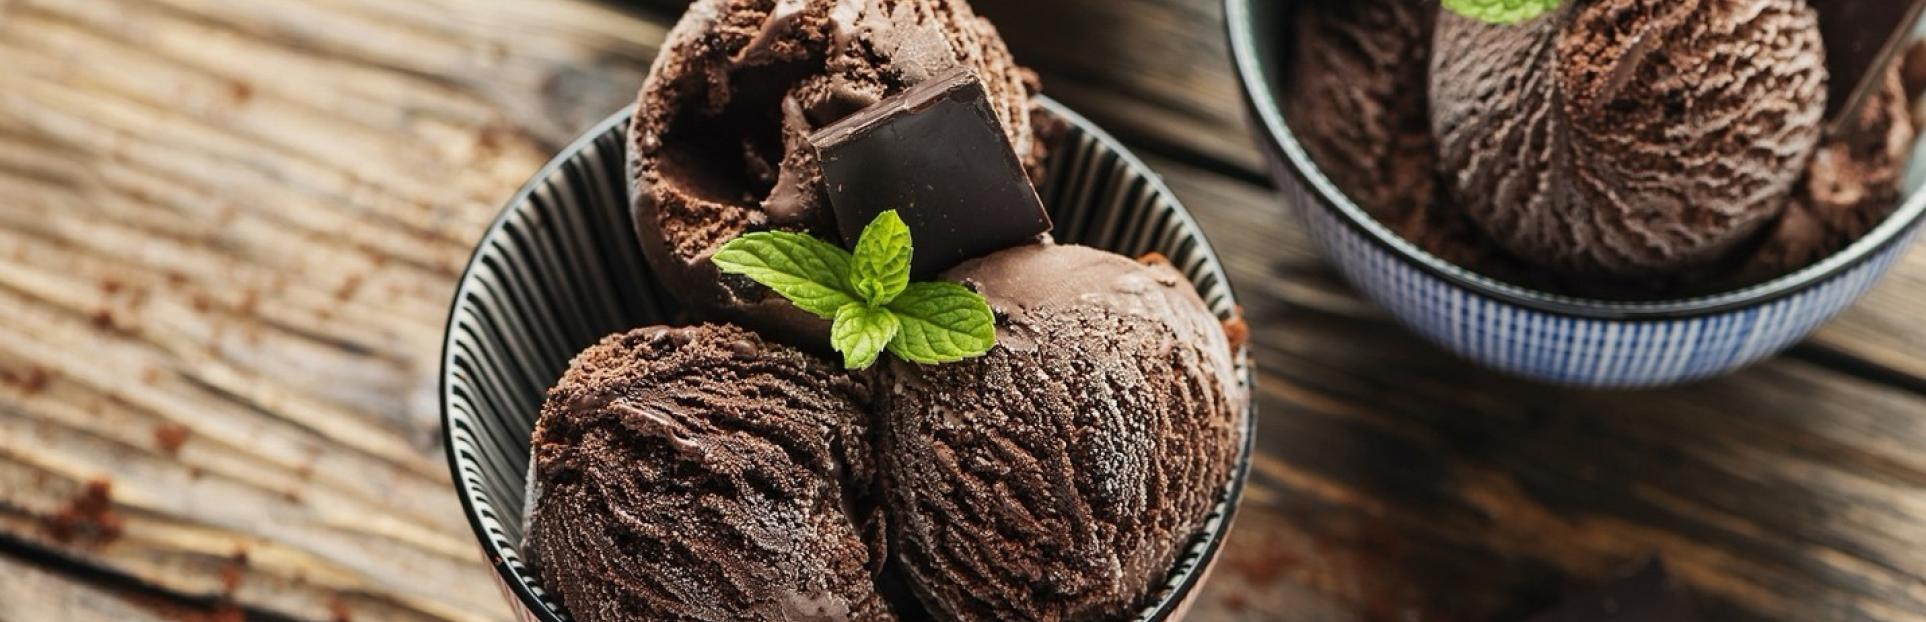 plant-based ice creams and frozen desserts